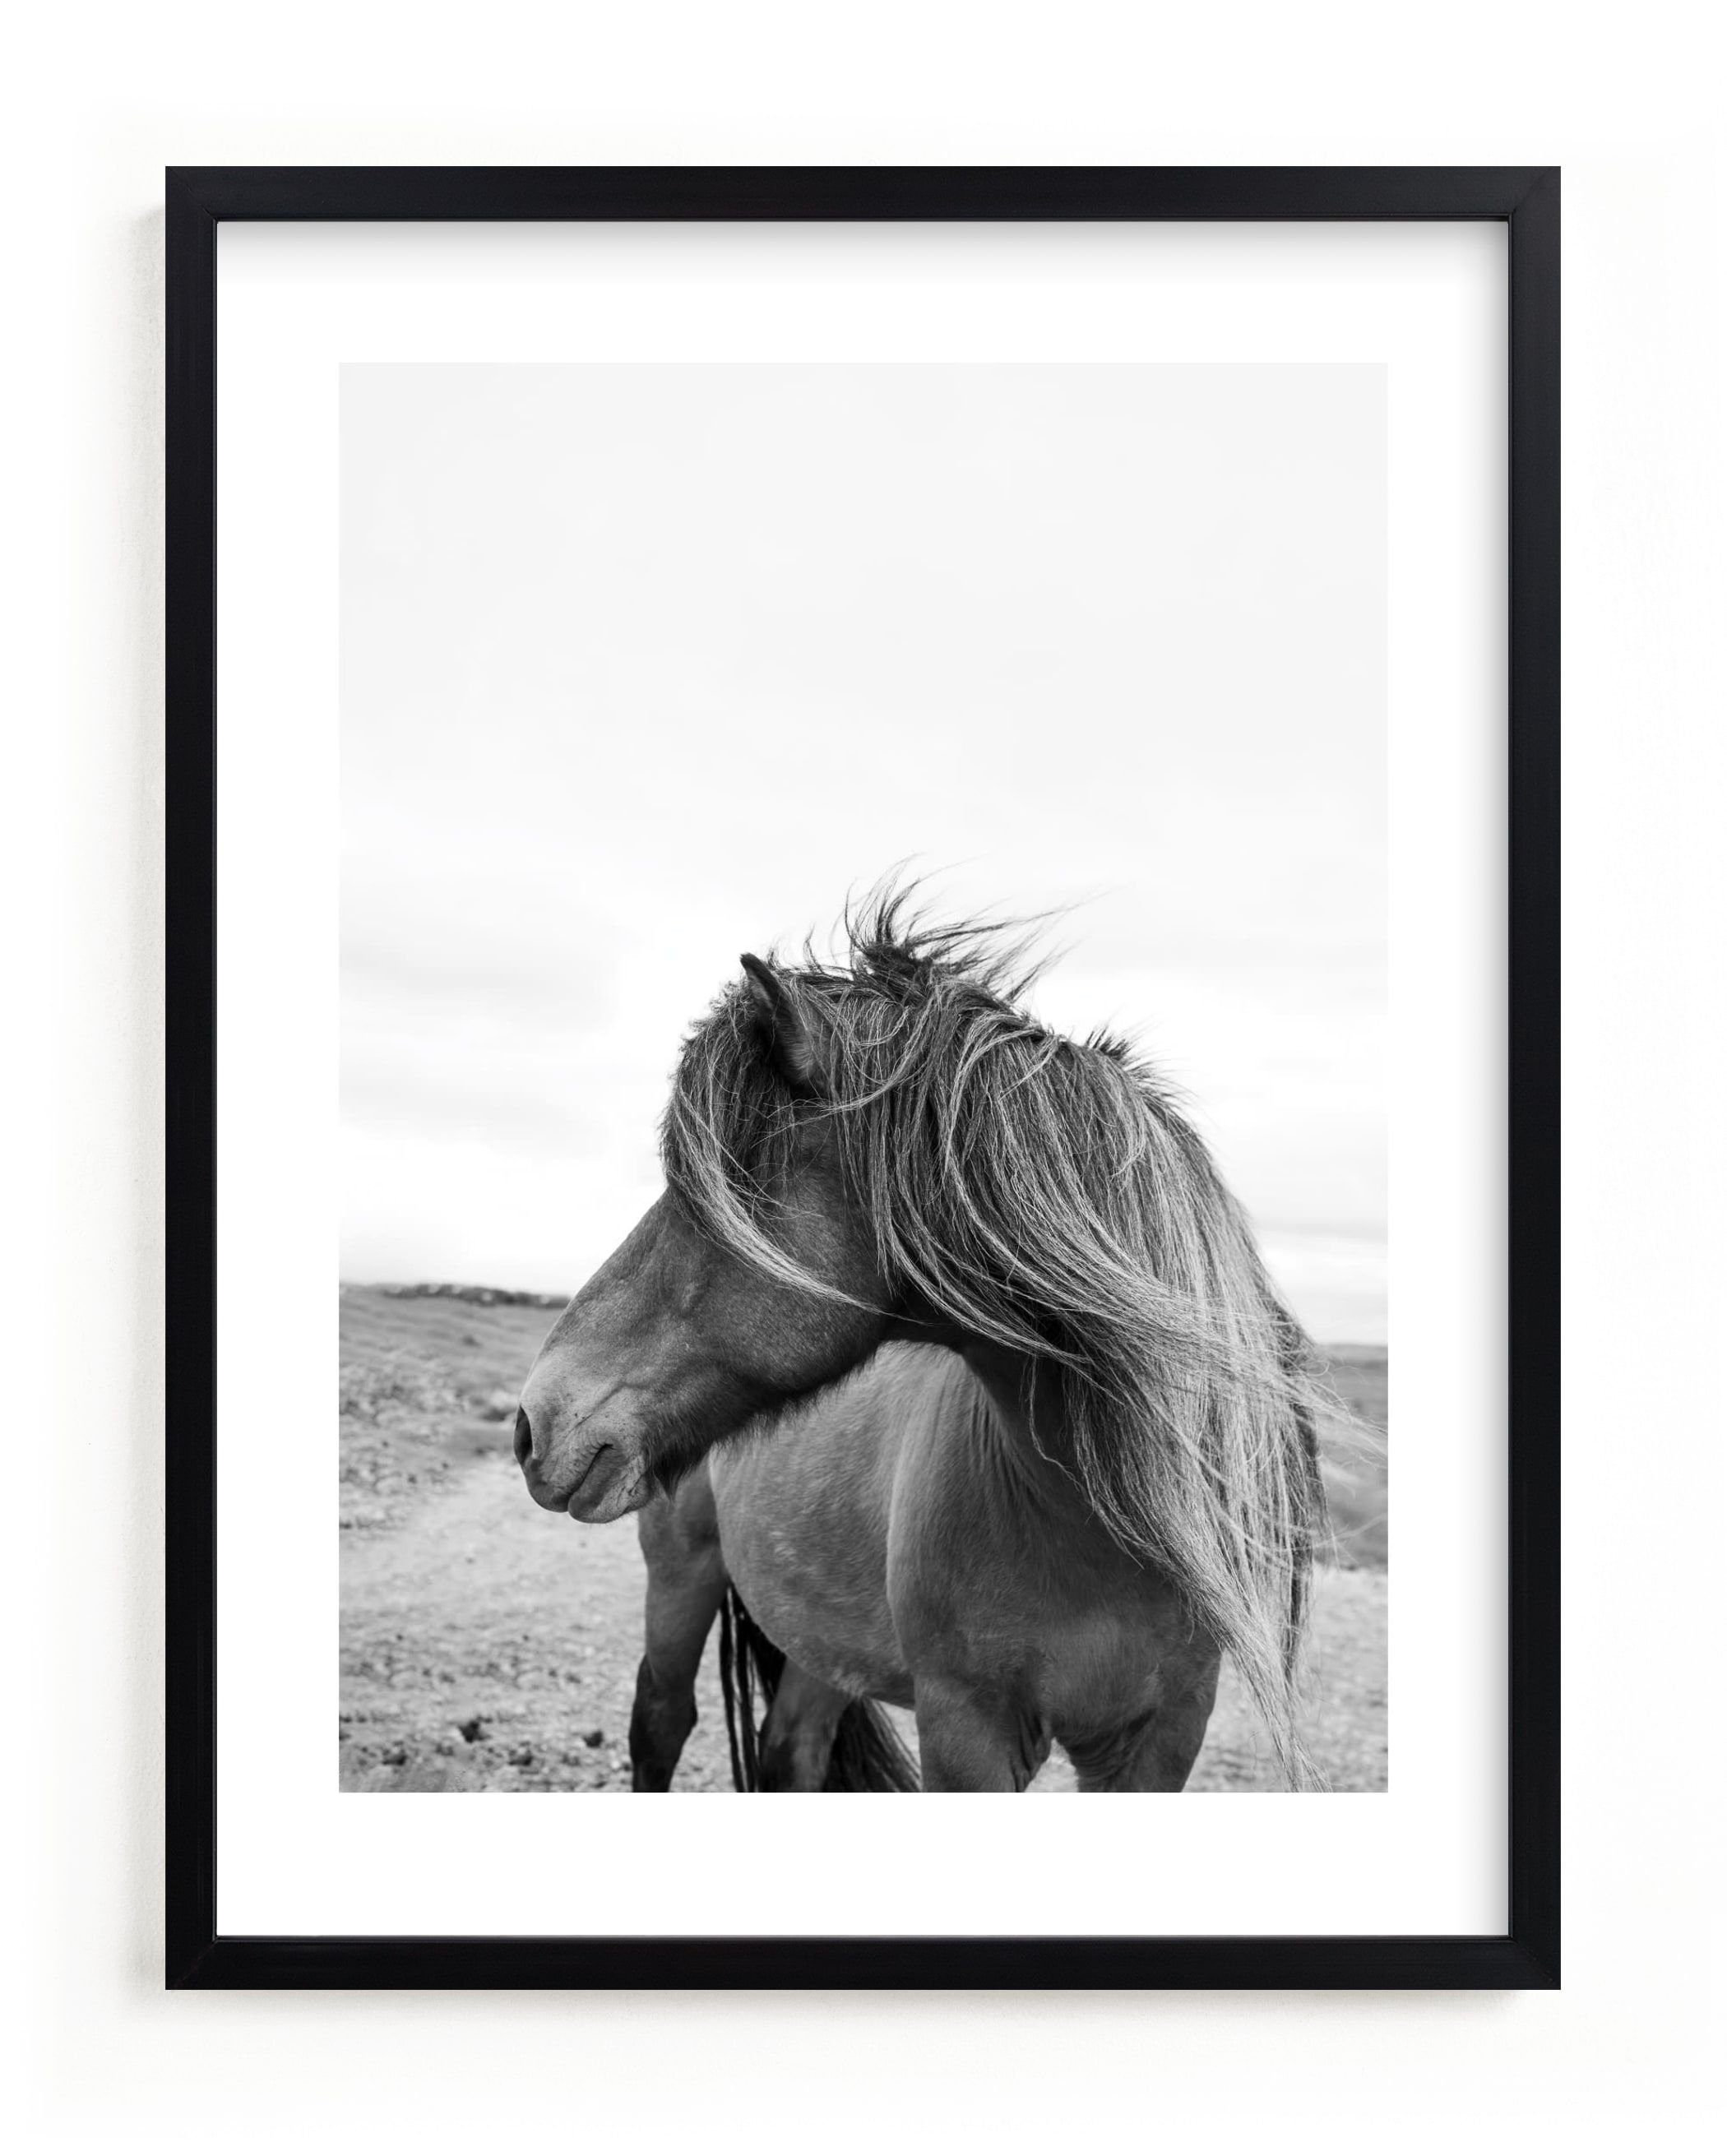 "A Horse and the Wind" - Photography Limited Edition Art Print by Ilze Lucero. | Minted